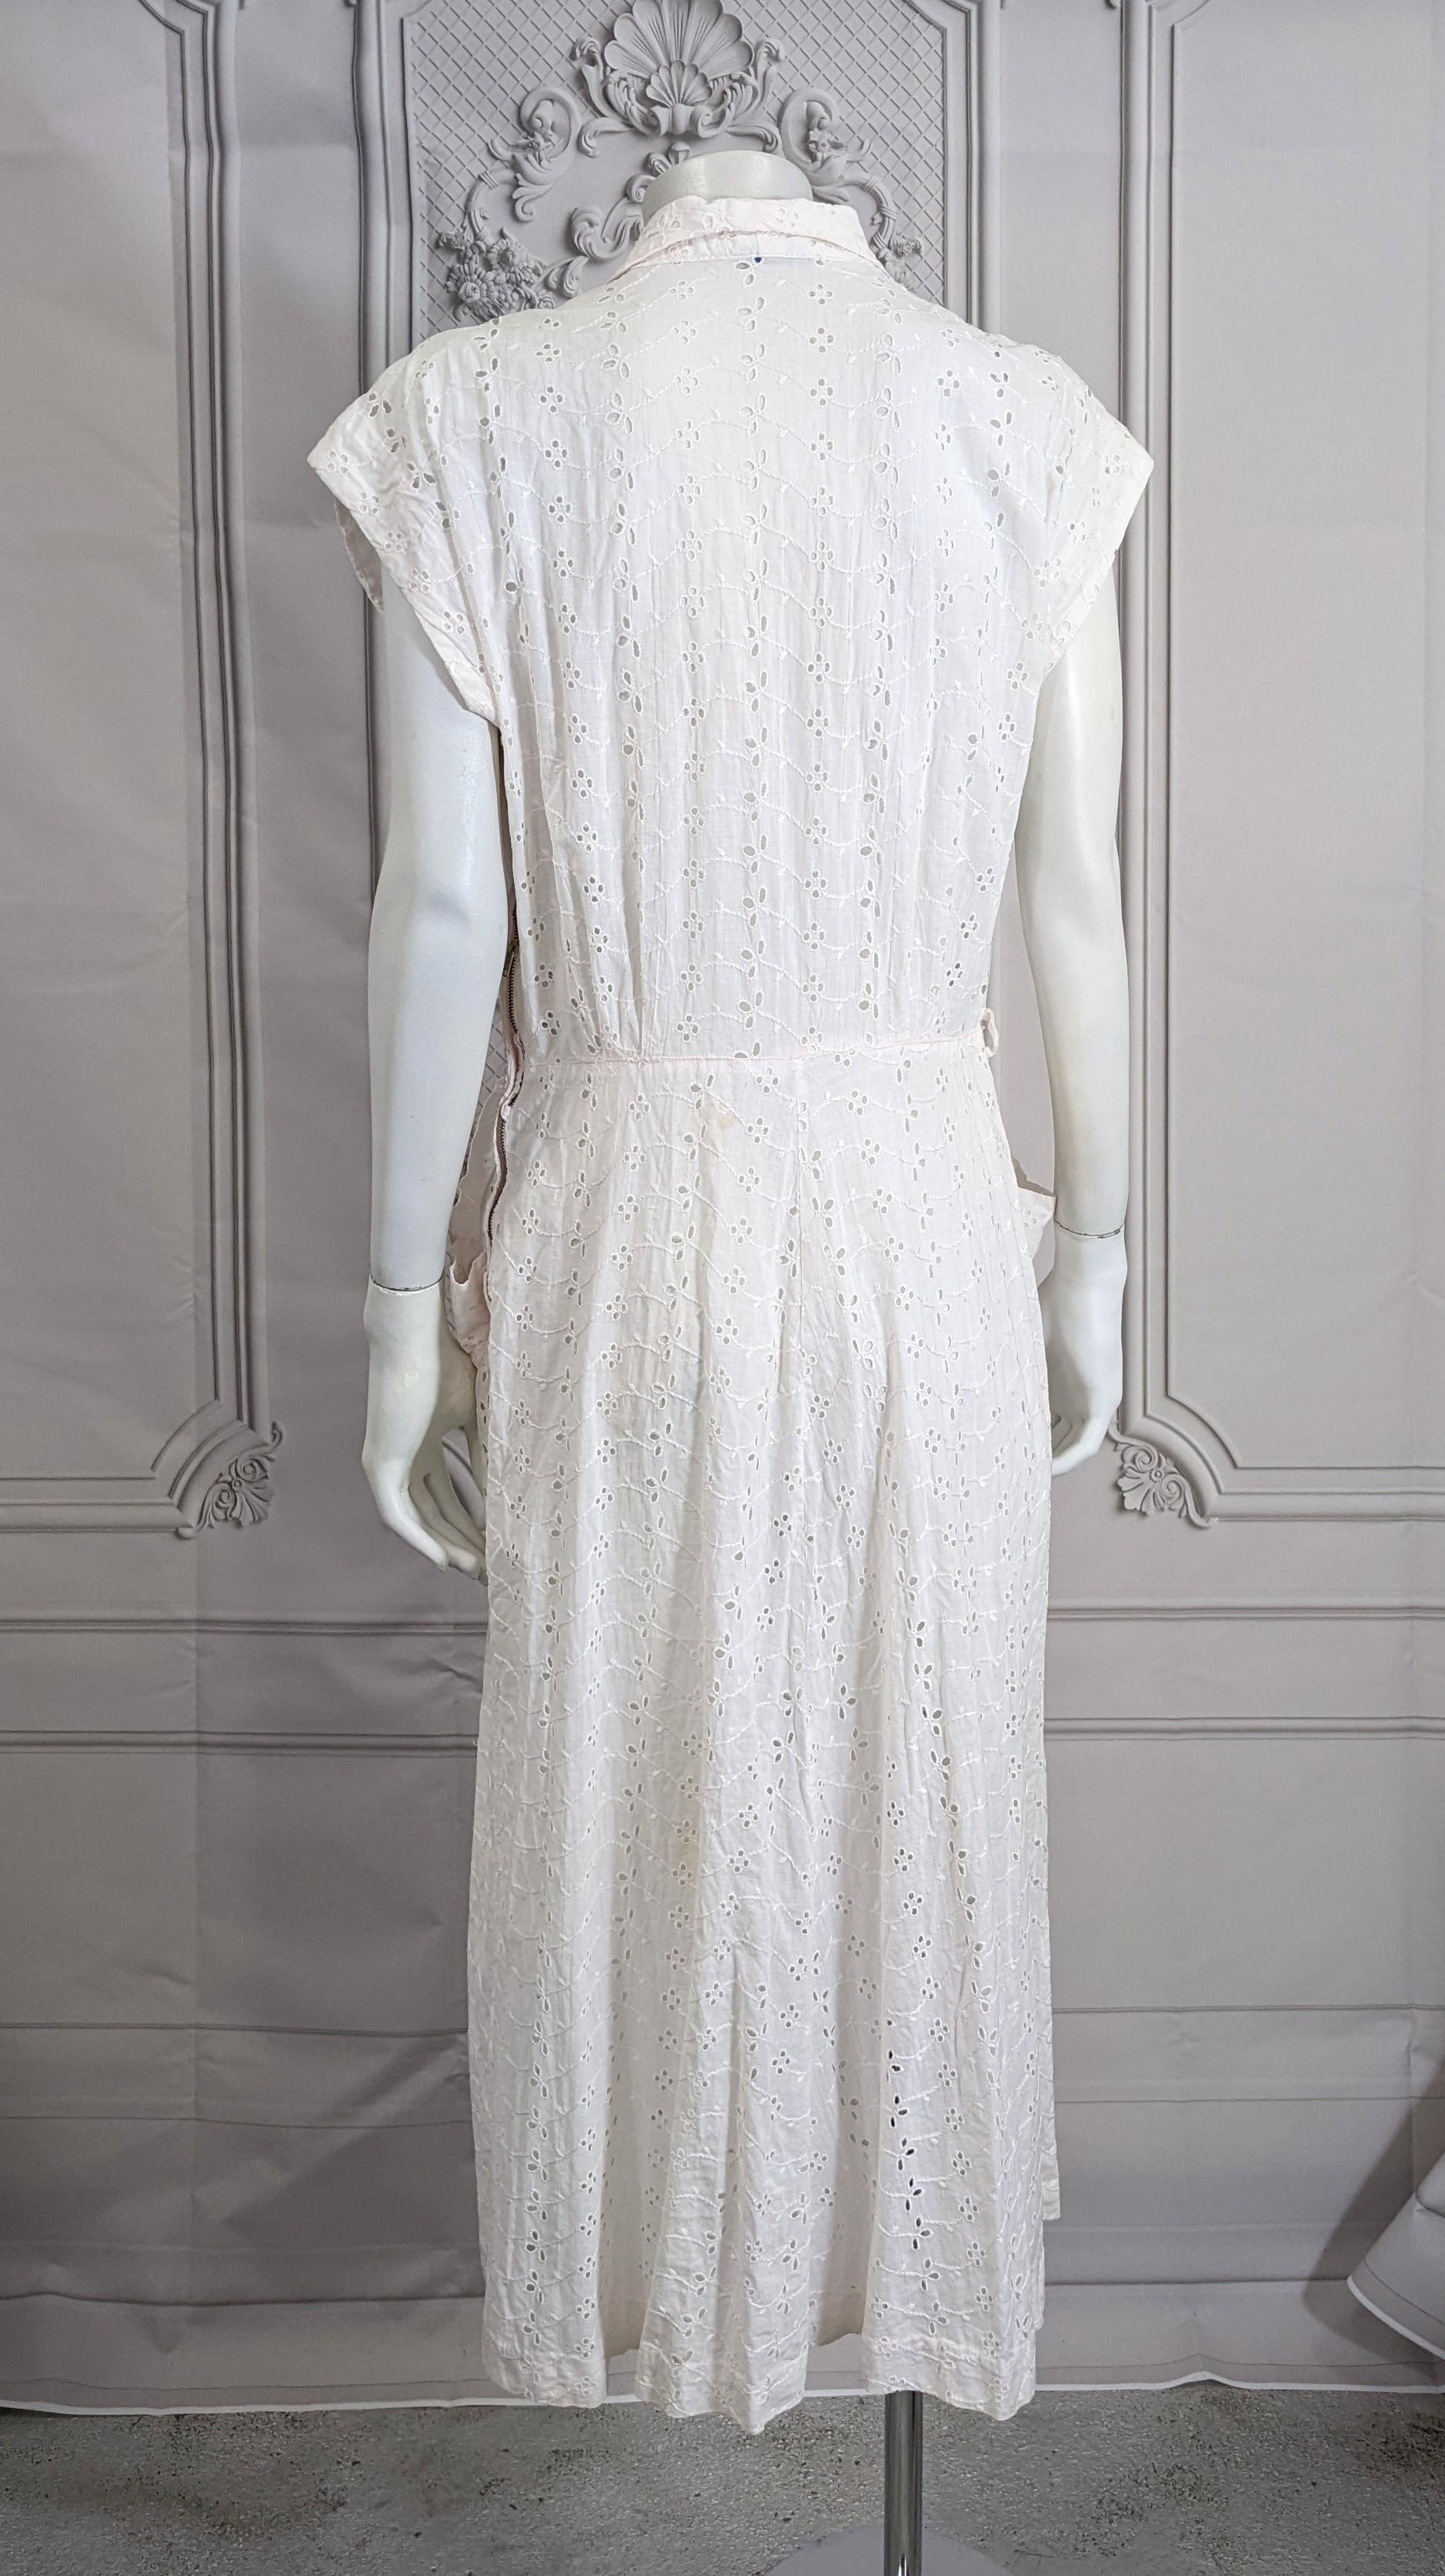 Women's or Men's Upcycled Eyelet Dress with Hand Embroidery, Studio VL For Sale